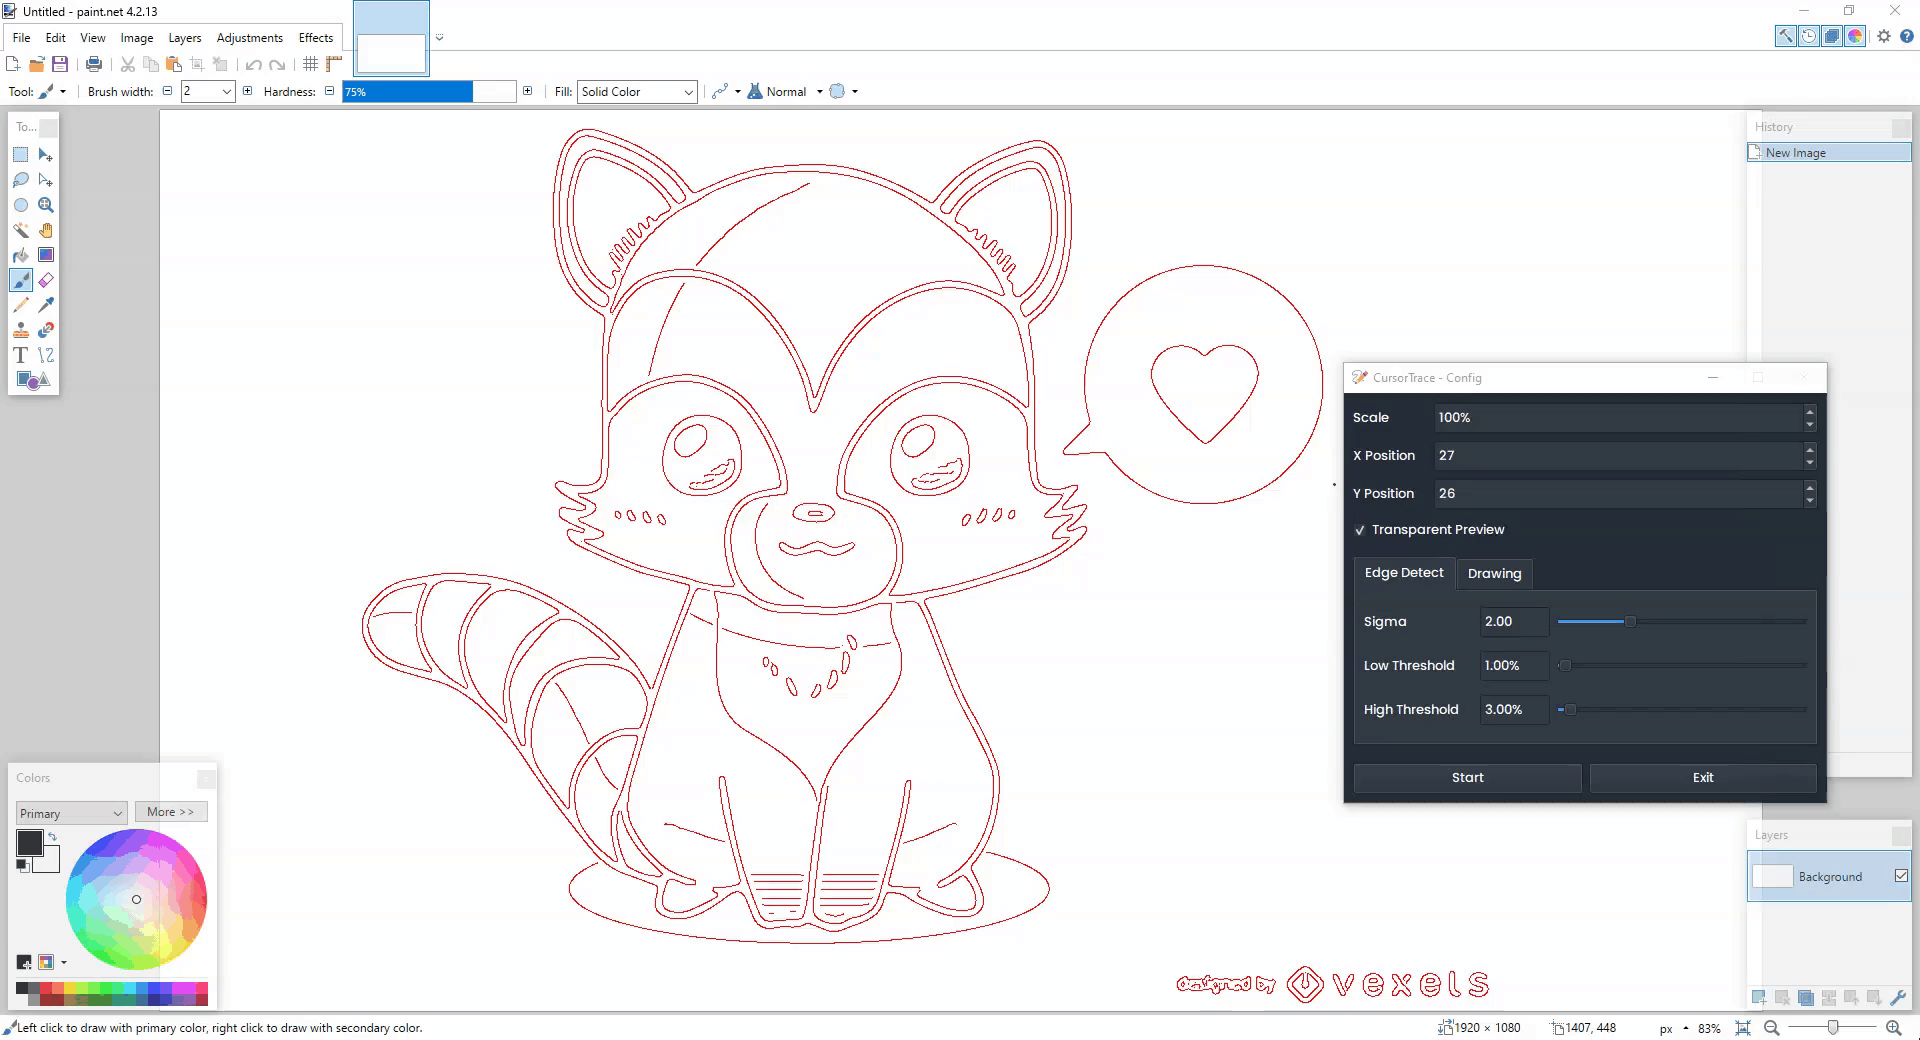 GitHub - Ruegg/AutoDraw: A program that uses your cursor to draw